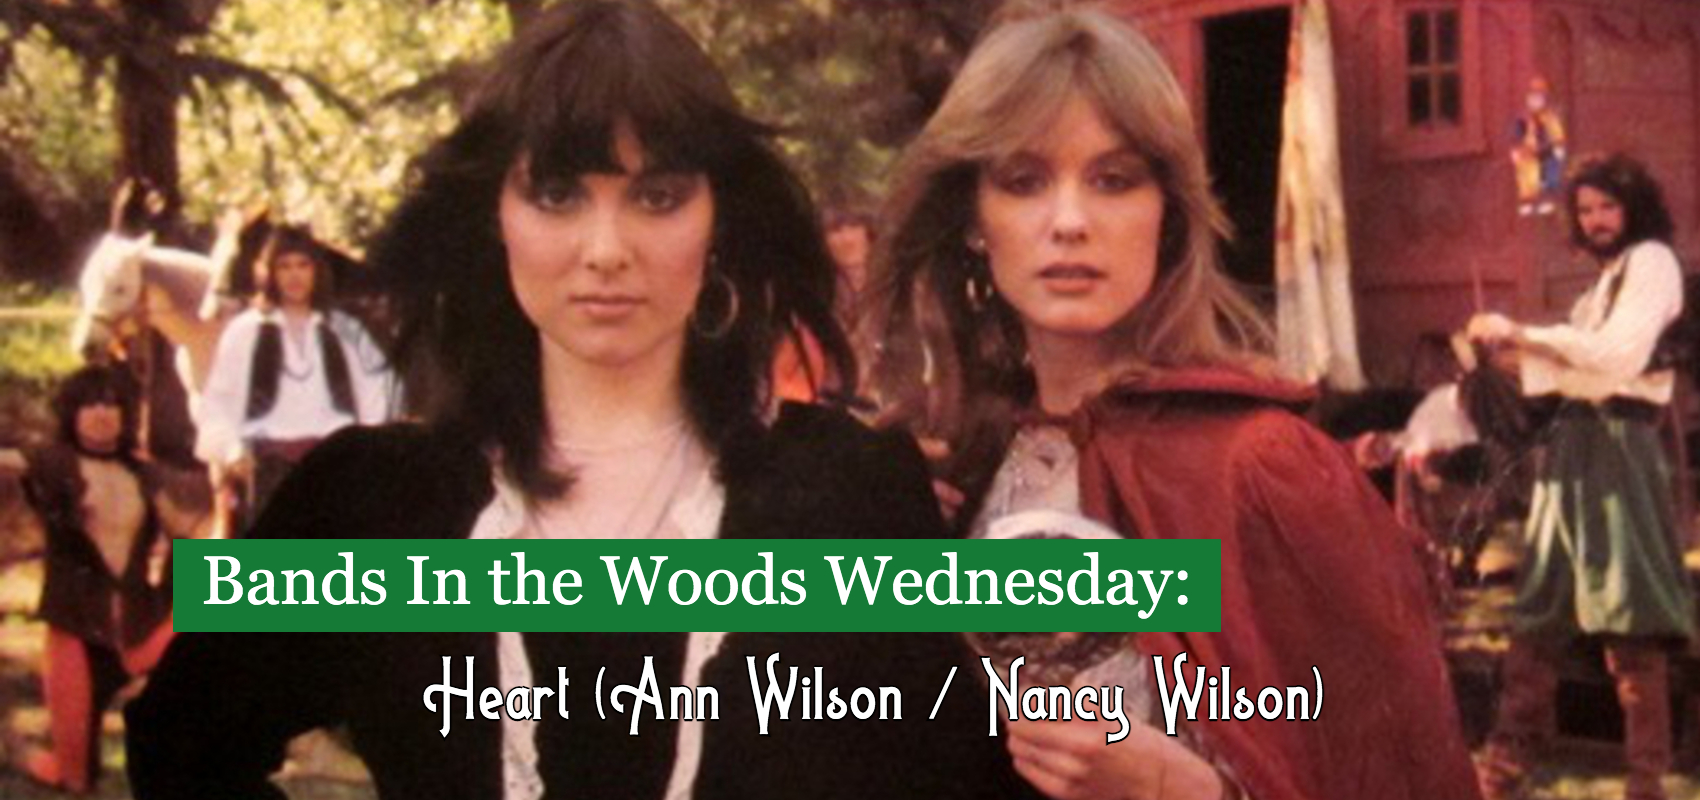 Ann Wilson and Nancy Wilson of Heart stand outdoors in front of a Gypsy caravan